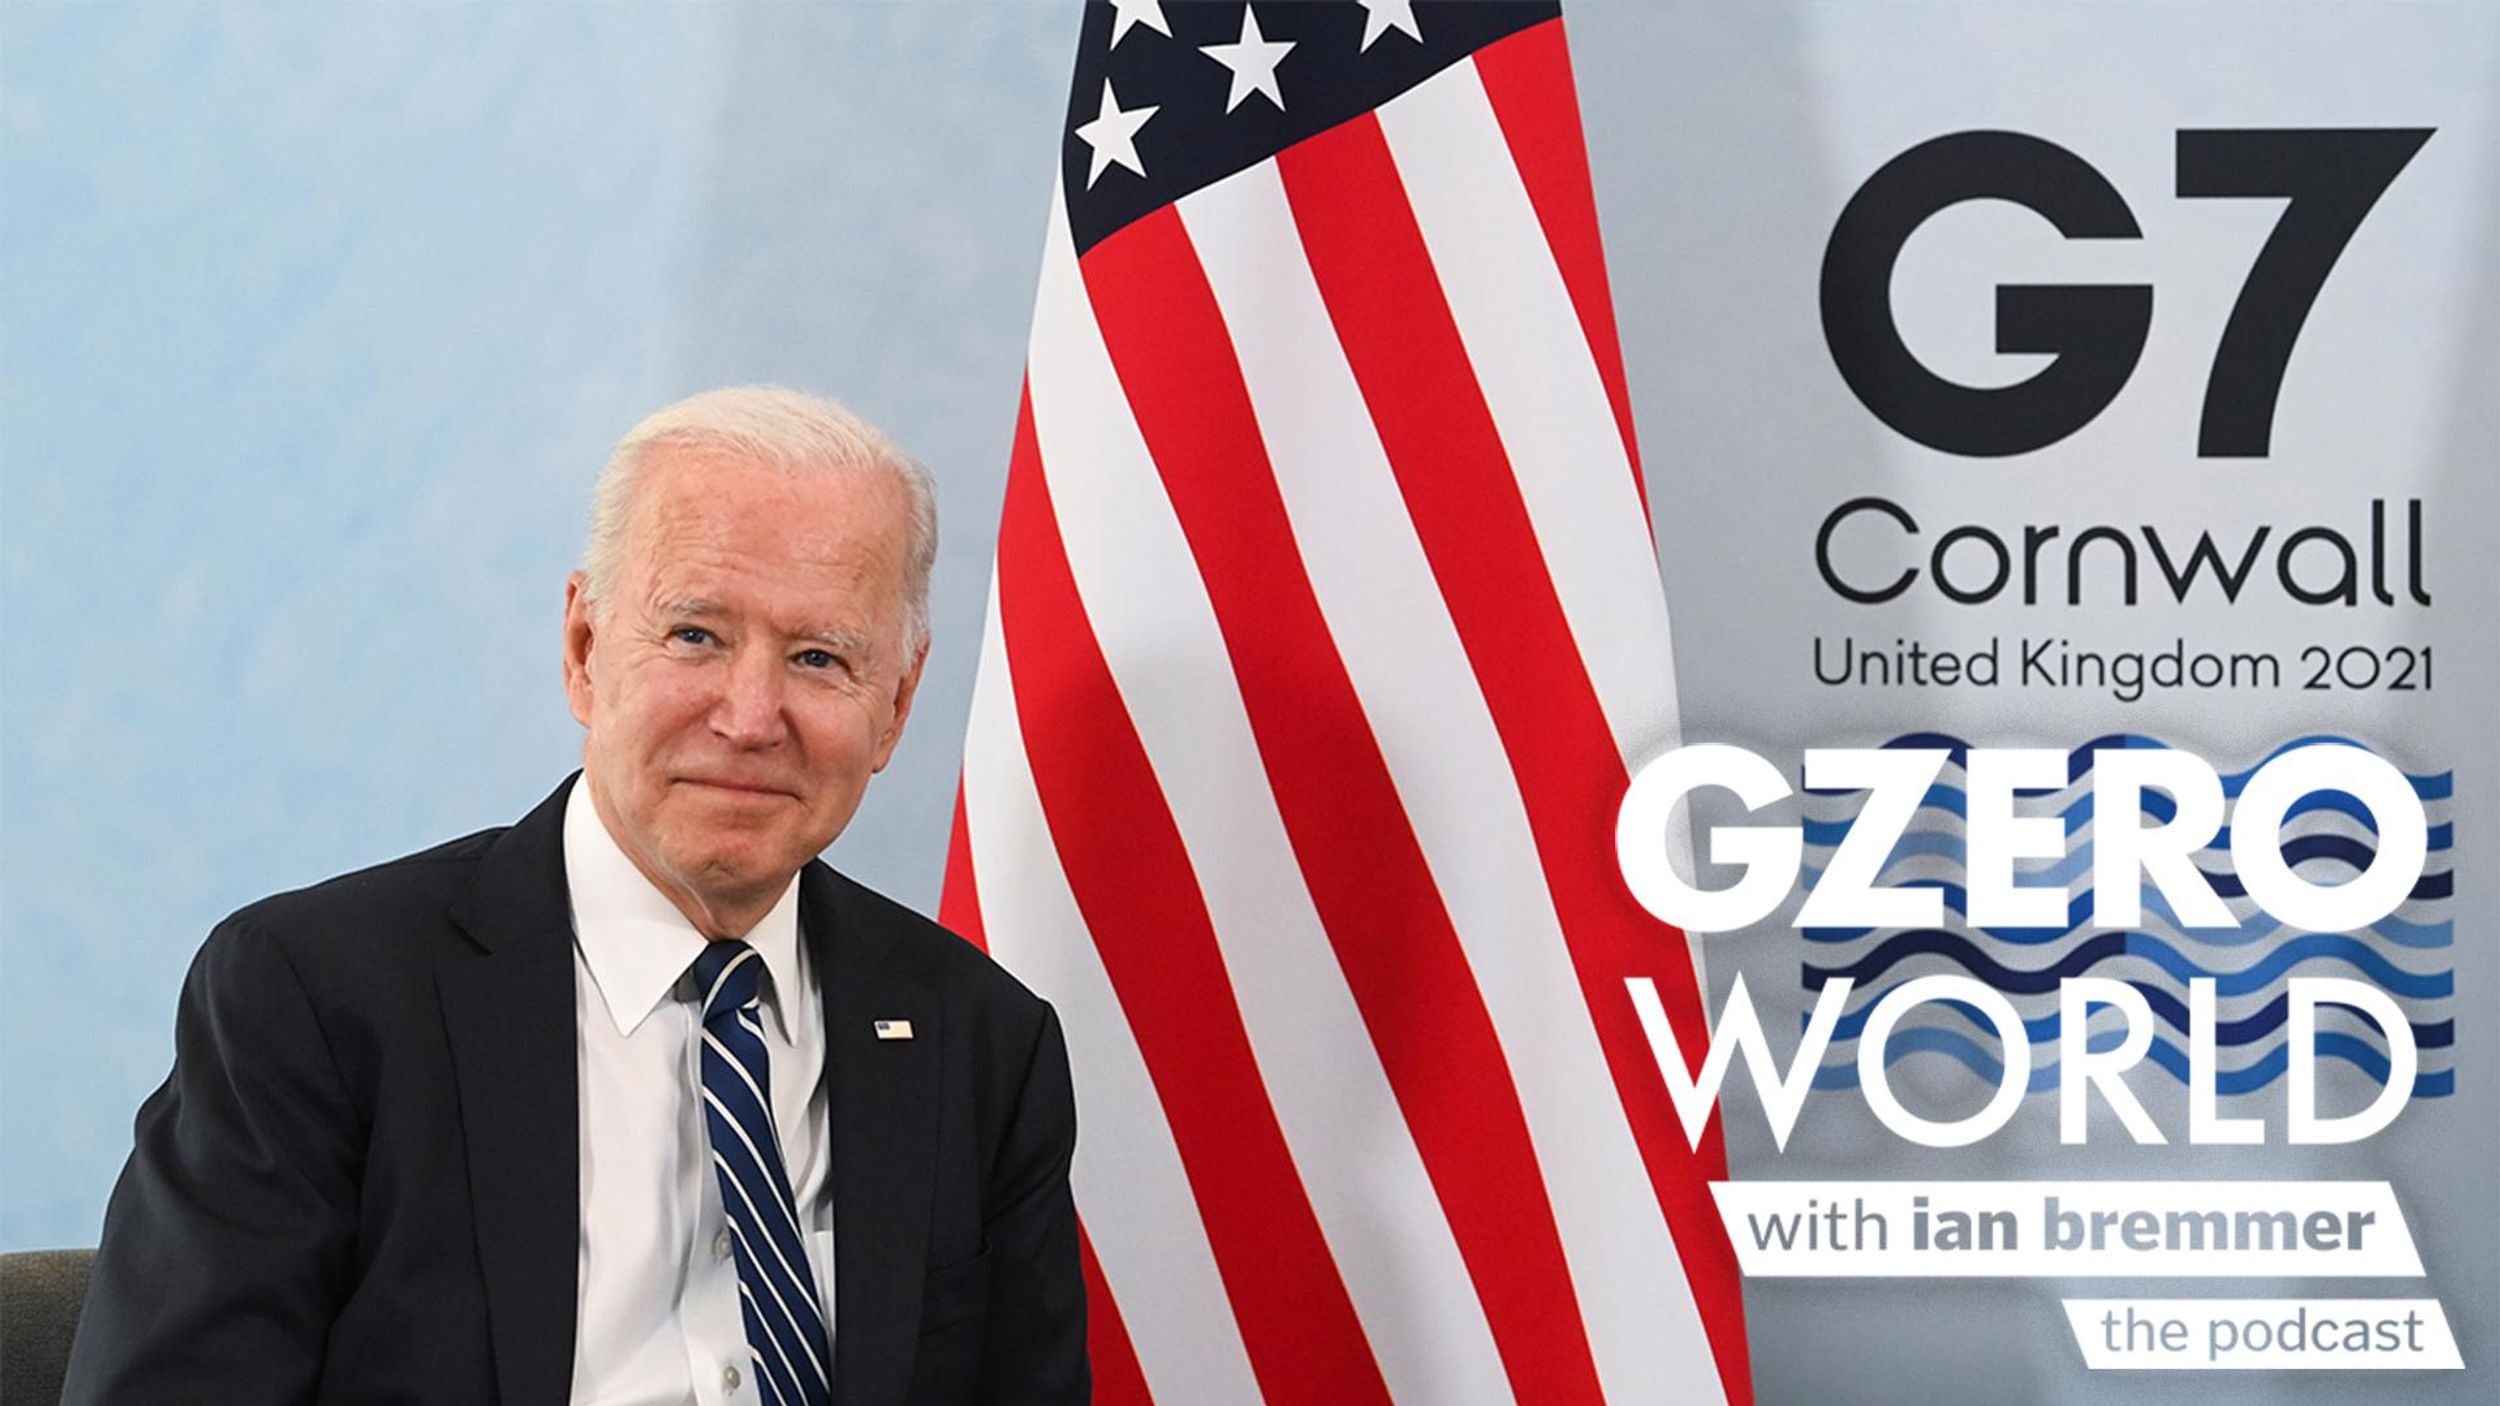 Podcast: A former US diplomat rates Biden’s first presidential trip abroad